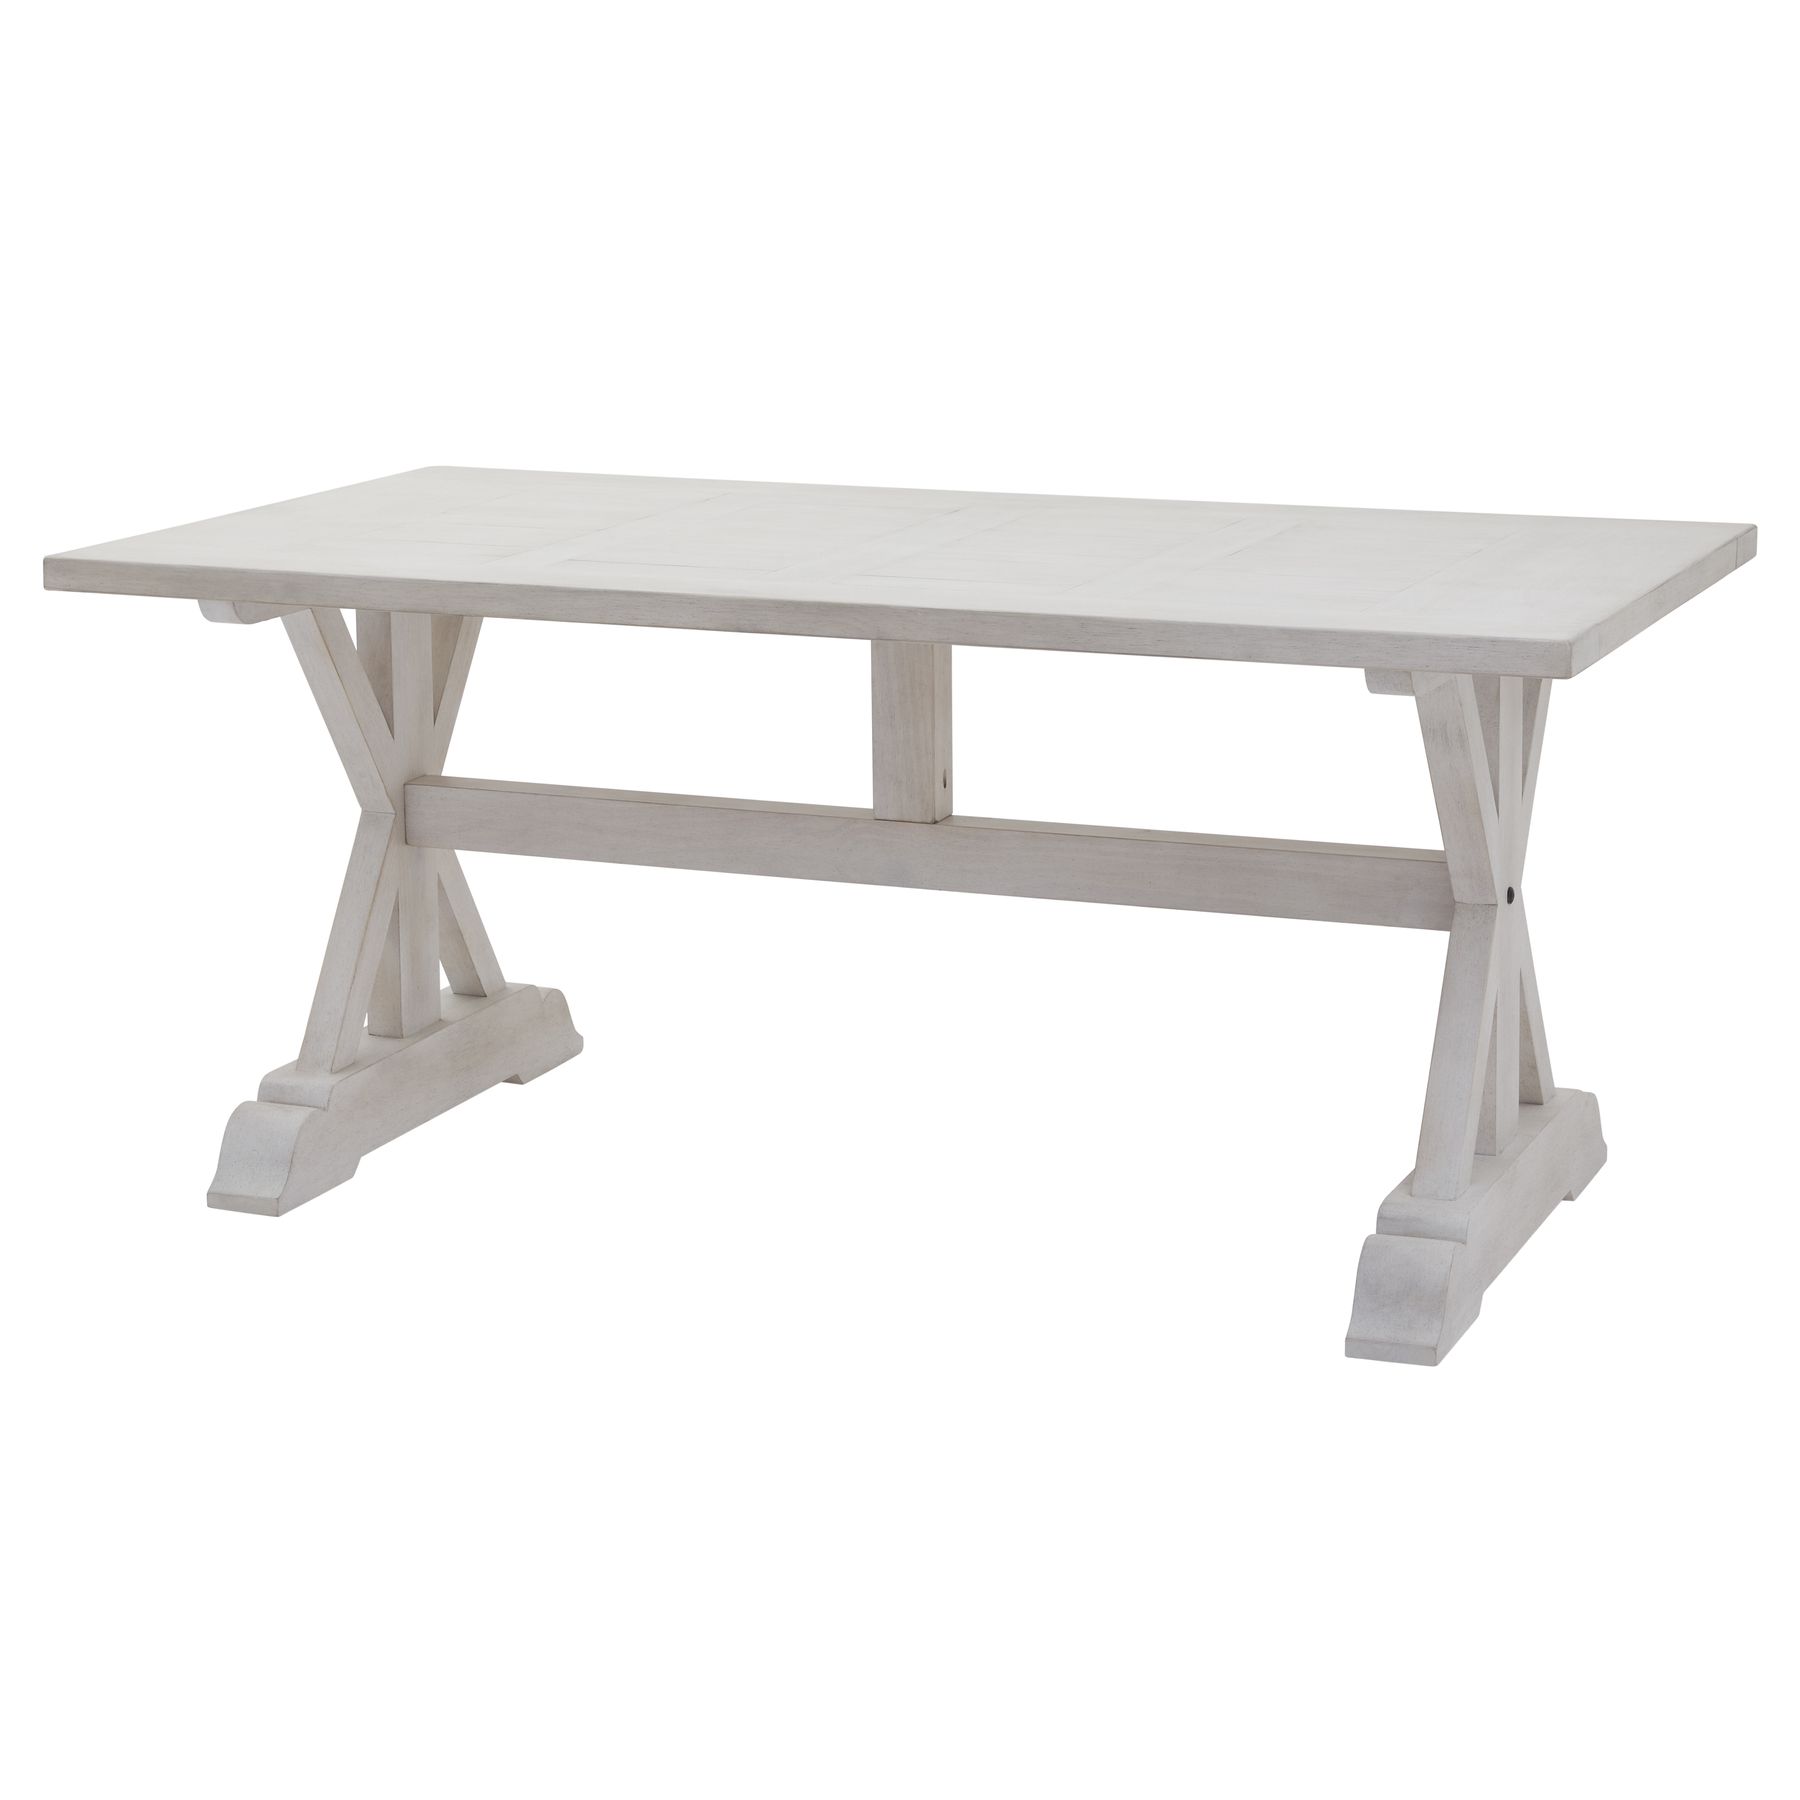 Stamford Plank Collection Dining Table - Image 1